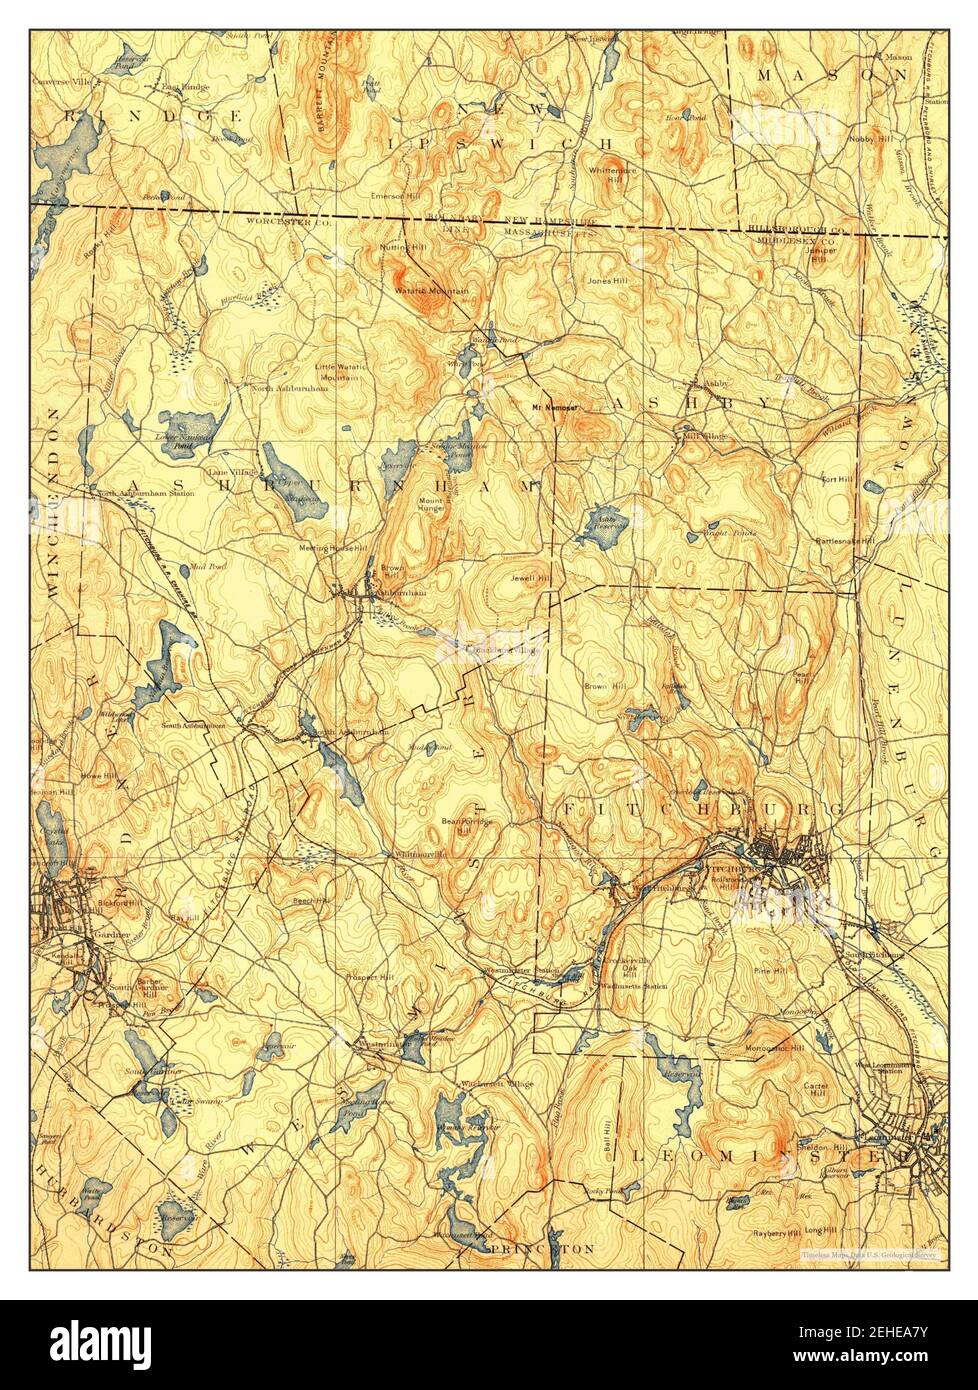 Fitchburg Massachusetts Map 1887 162500 United States Of America By Timeless Maps Data Us 8955